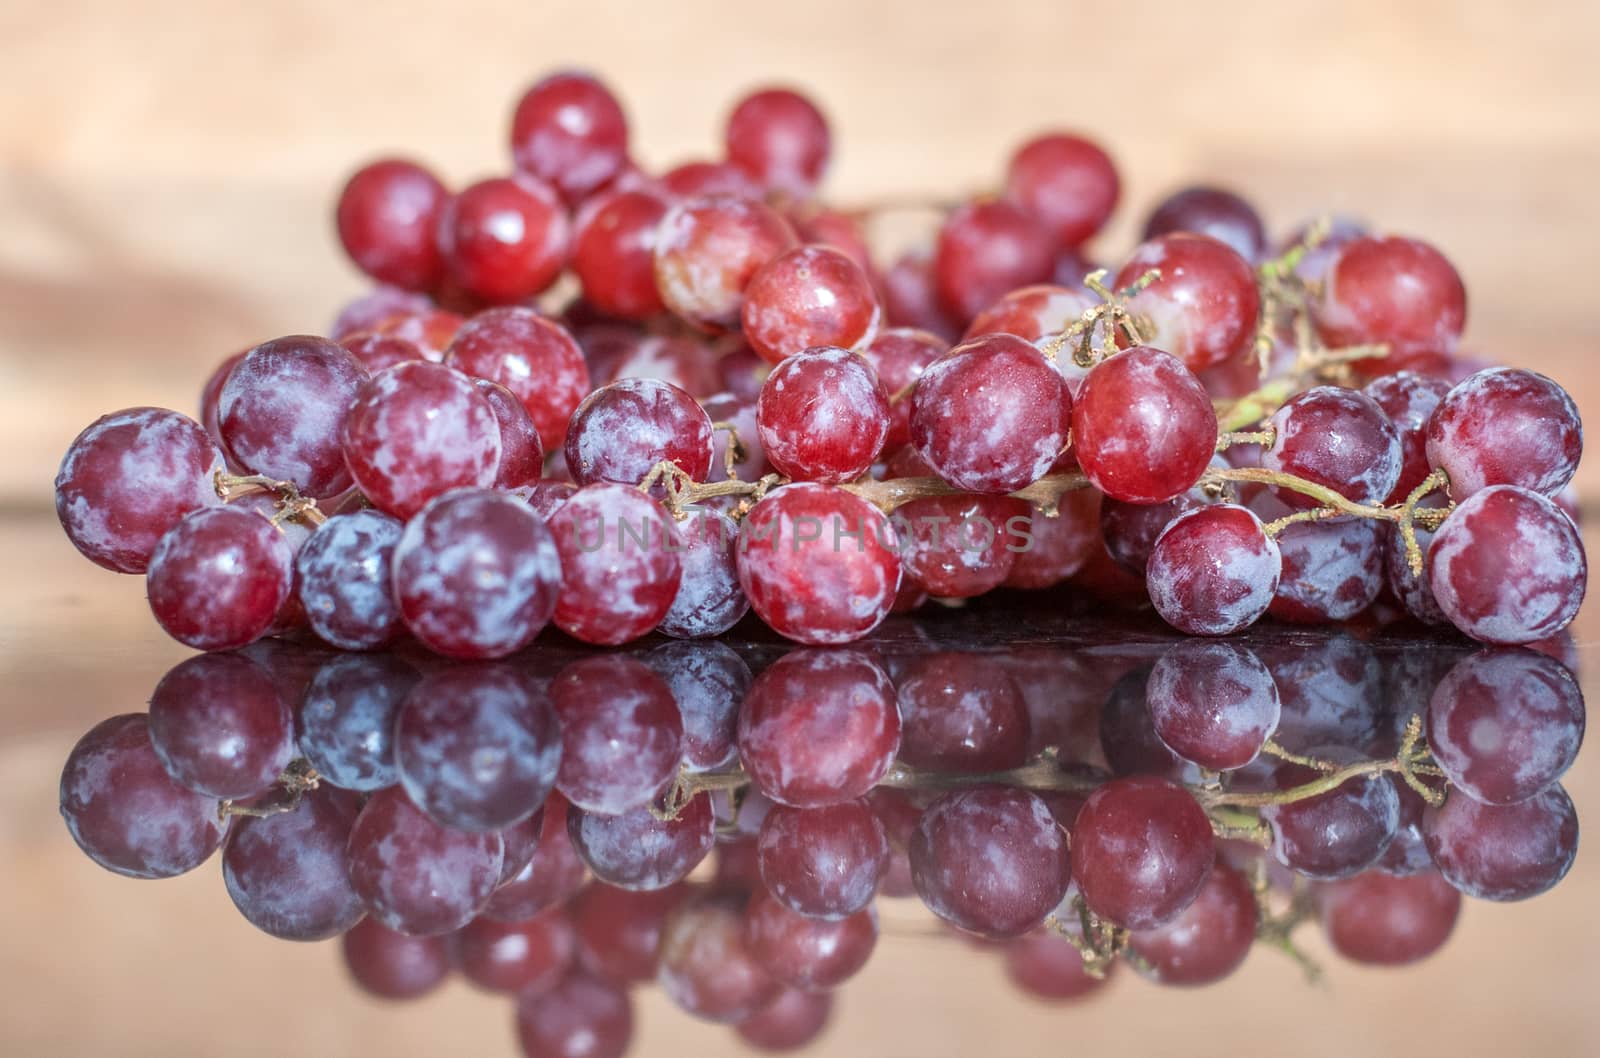 reflections of red grapes against a gold background